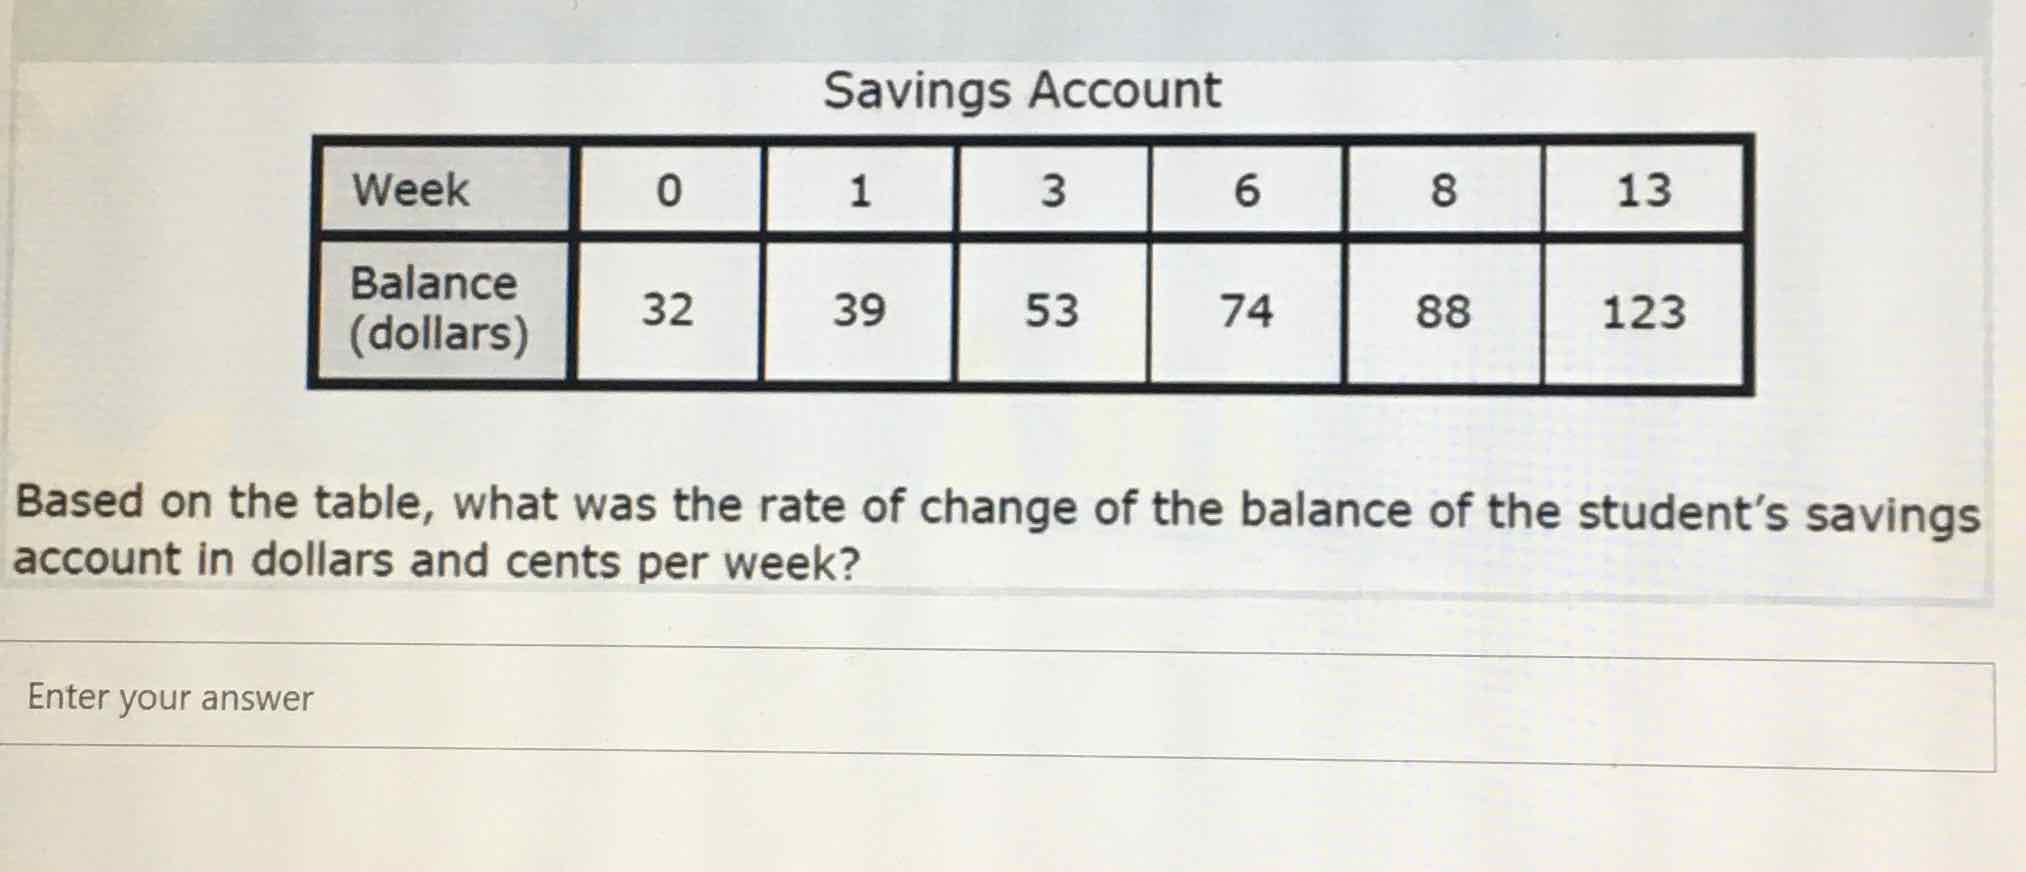 Savings Account
\begin{tabular}{|l|c|c|c|c|c|c|}
\hline Week & 0 & 1 & 3 & 6 & 8 & 13 \\
\hline Balance (dollars) & 32 & 39 & 53 & 74 & 88 & 123 \\
\hline
\end{tabular}
Based on the table, what was the rate of change of the balance of the student's savings account in dollars and cents per week?
Enter your answer